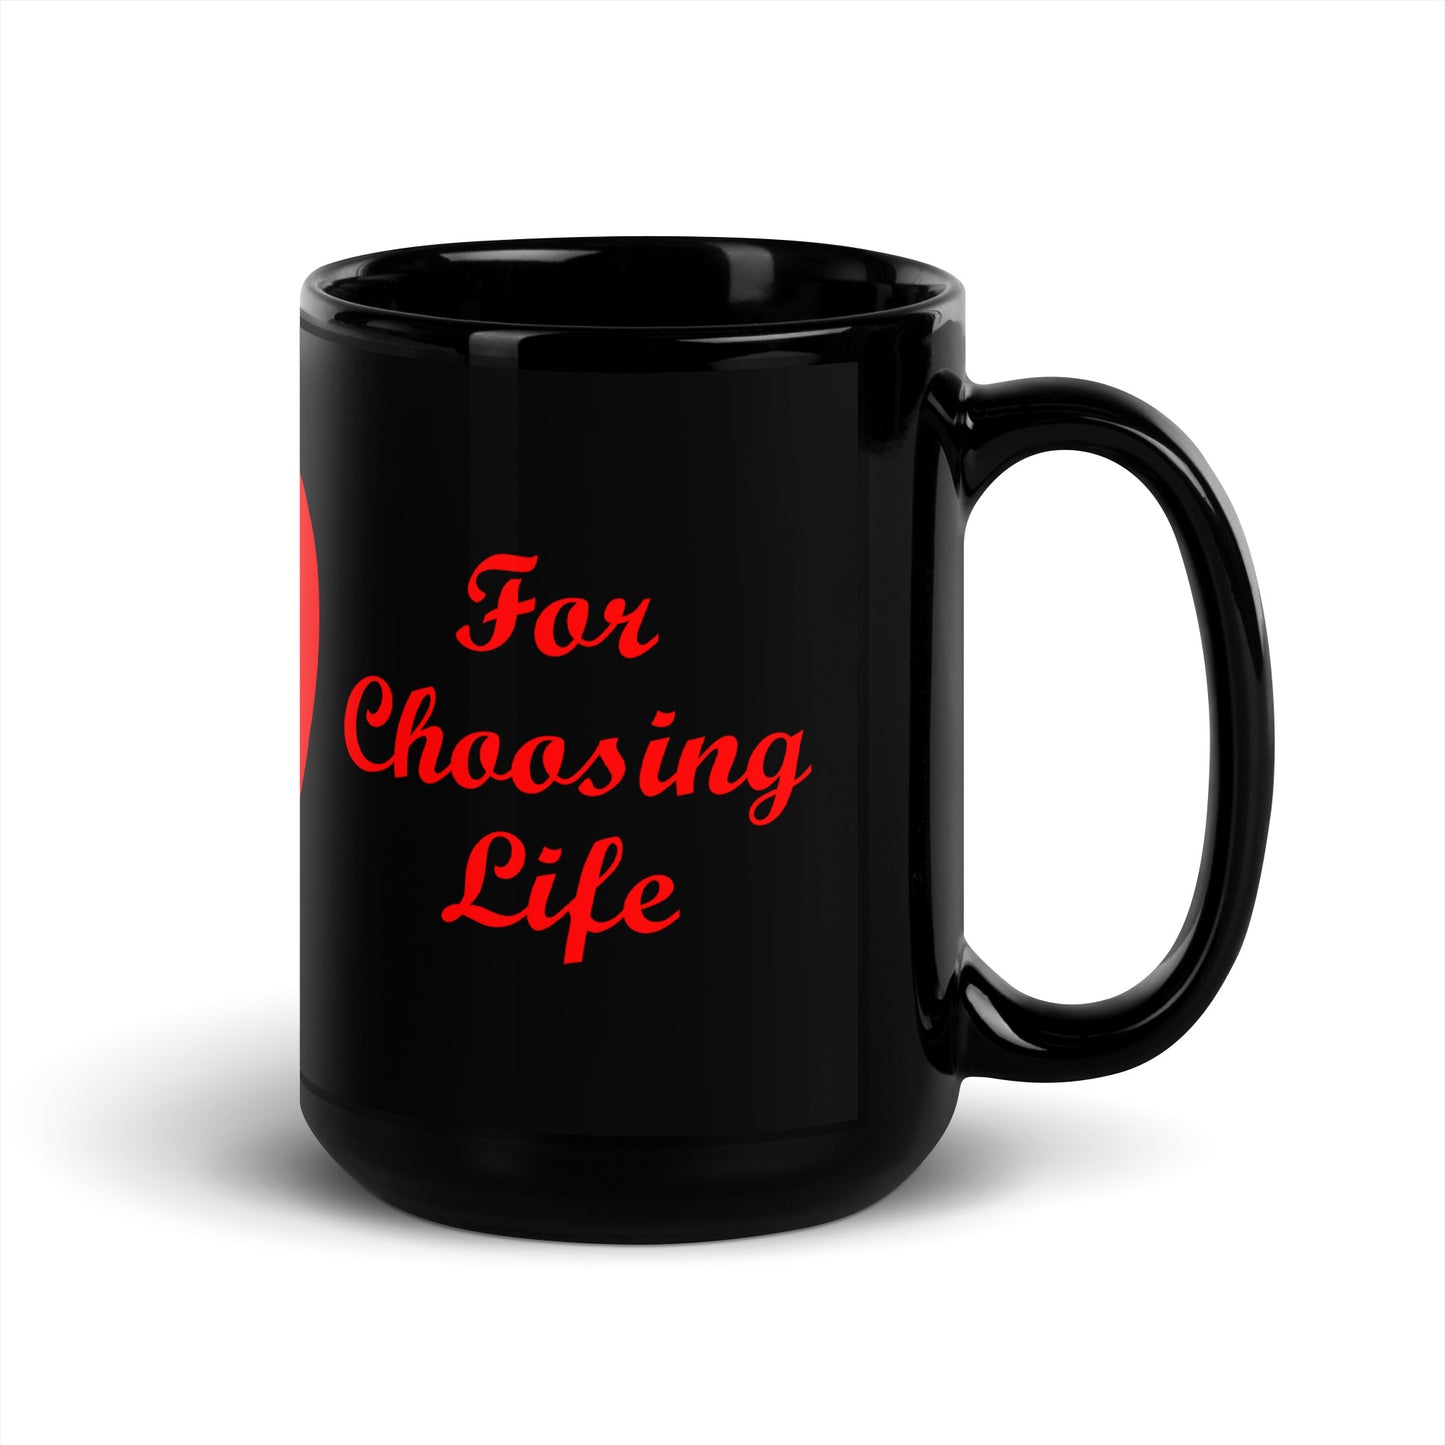 A002 Mug - Black Glossy Ceramic Mug Featuring Mother and Baby Graphic with text “Thank You Mom For Choosing Life.”